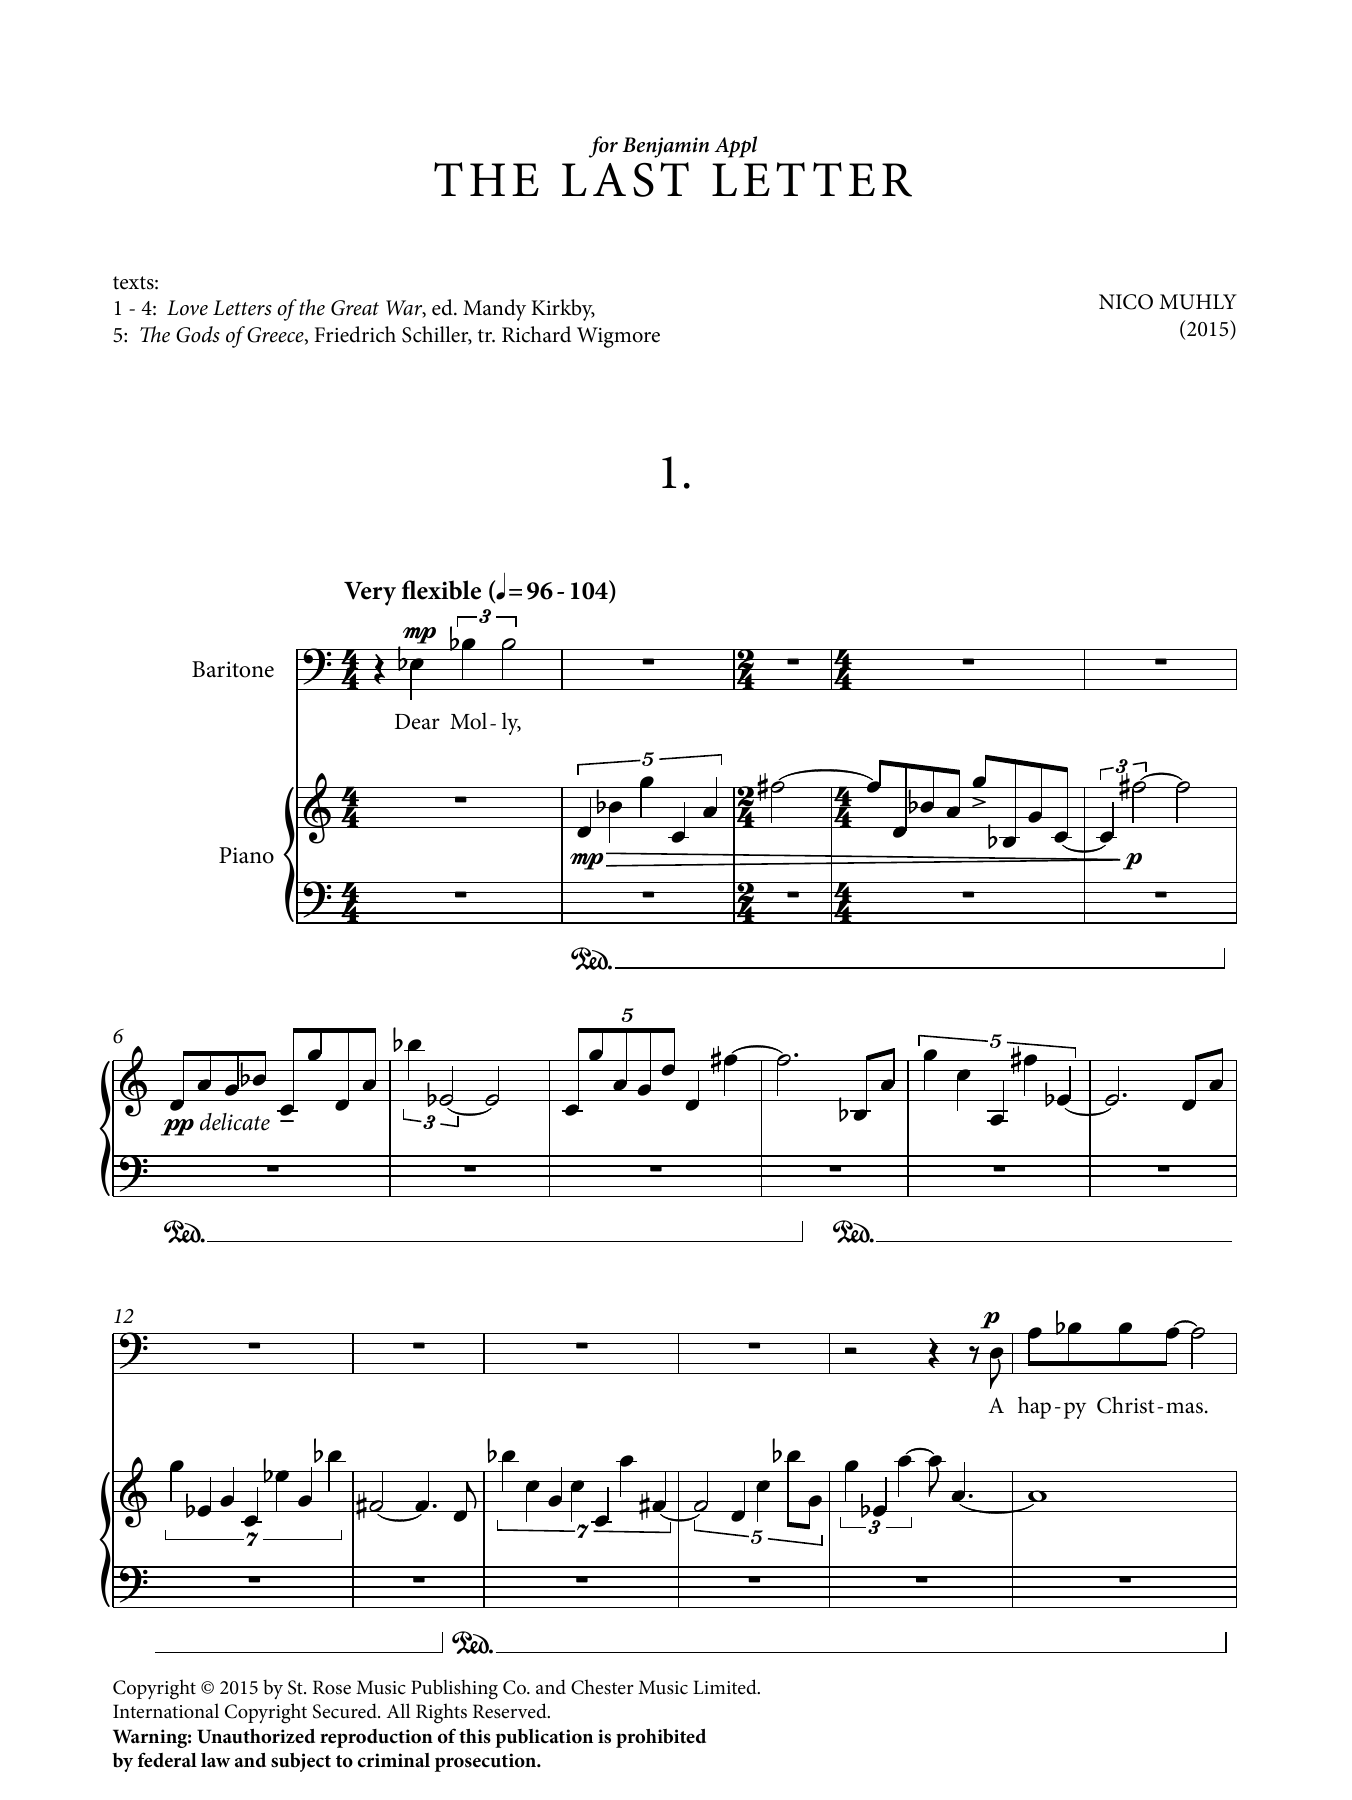 Download Nico Muhly The Last Letter Sheet Music